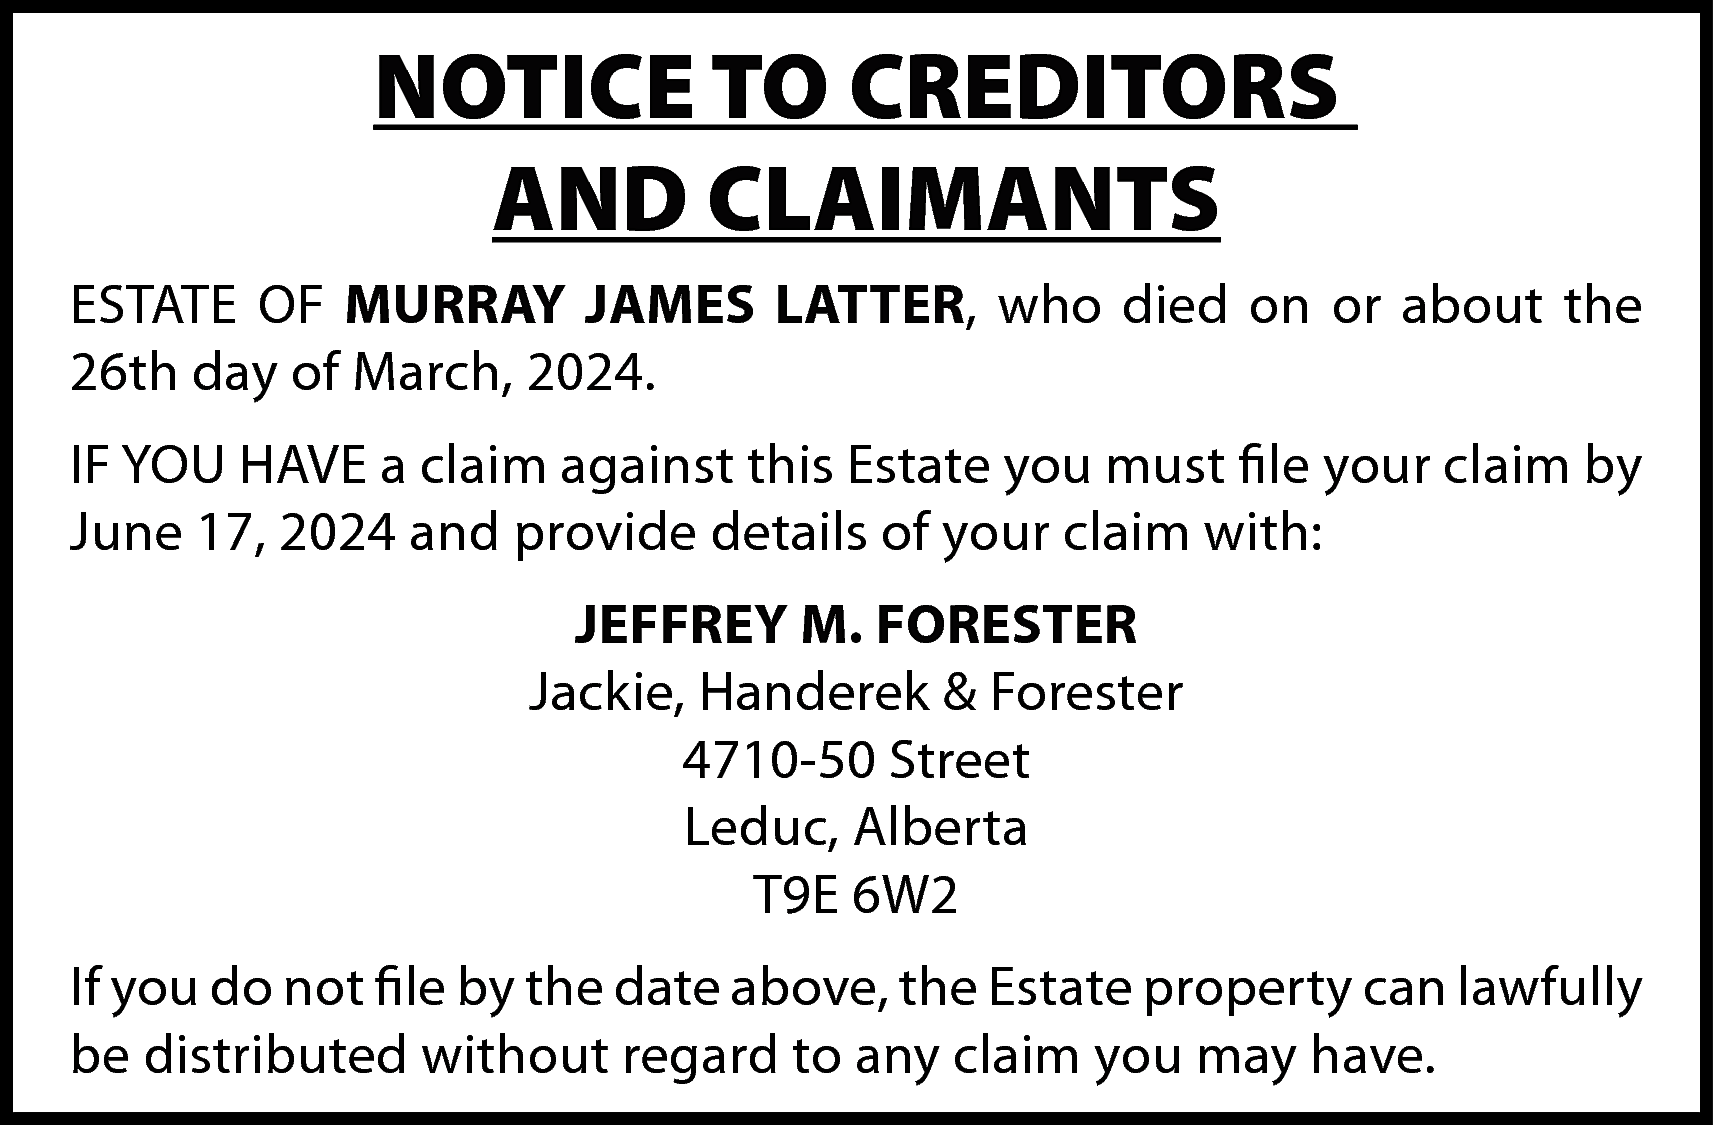 NOTICE TO CREDITORS <br>AND CLAIMANTS  NOTICE TO CREDITORS  AND CLAIMANTS  ESTATE OF MURRAY JAMES LATTER, who died on or about the  26th day of March, 2024.  IF YOU HAVE a claim against this Estate you must file your claim by  June 17, 2024 and provide details of your claim with:  JEFFREY M. FORESTER  Jackie, Handerek & Forester  4710-50 Street  Leduc, Alberta  T9E 6W2  If you do not file by the date above, the Estate property can lawfully  be distributed without regard to any claim you may have.    